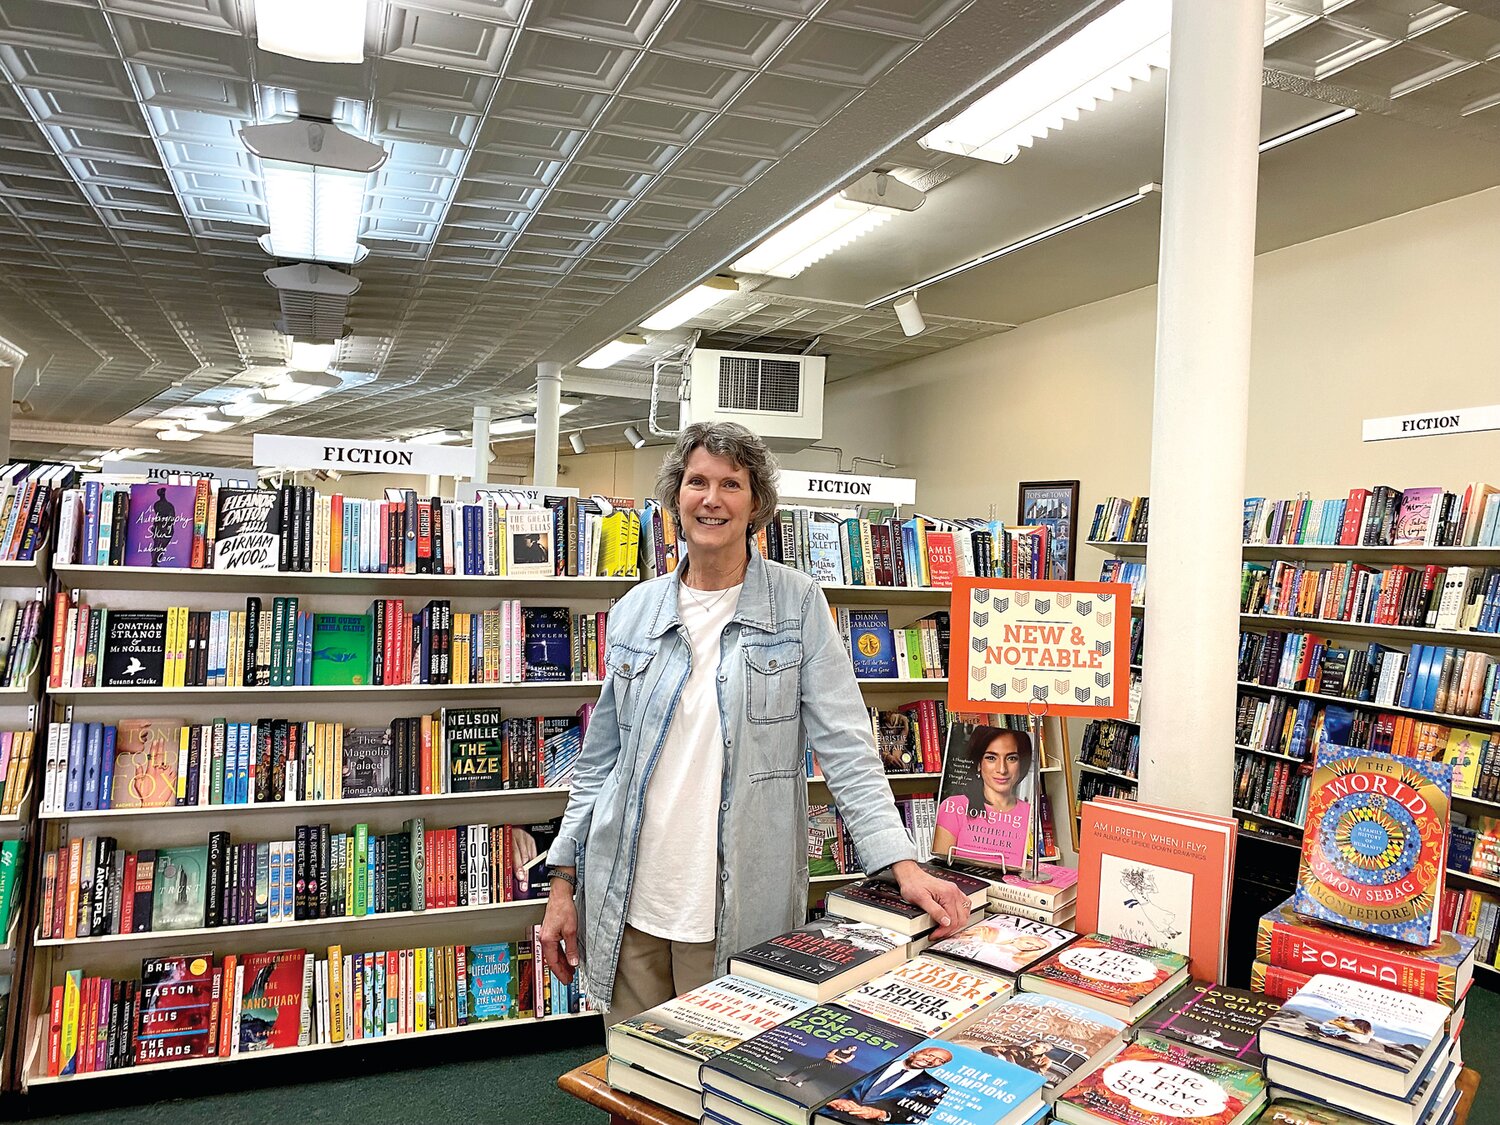 Doylestown Bookshop owner, Glenda Childs, says, "We want all books in the hands of all readers."